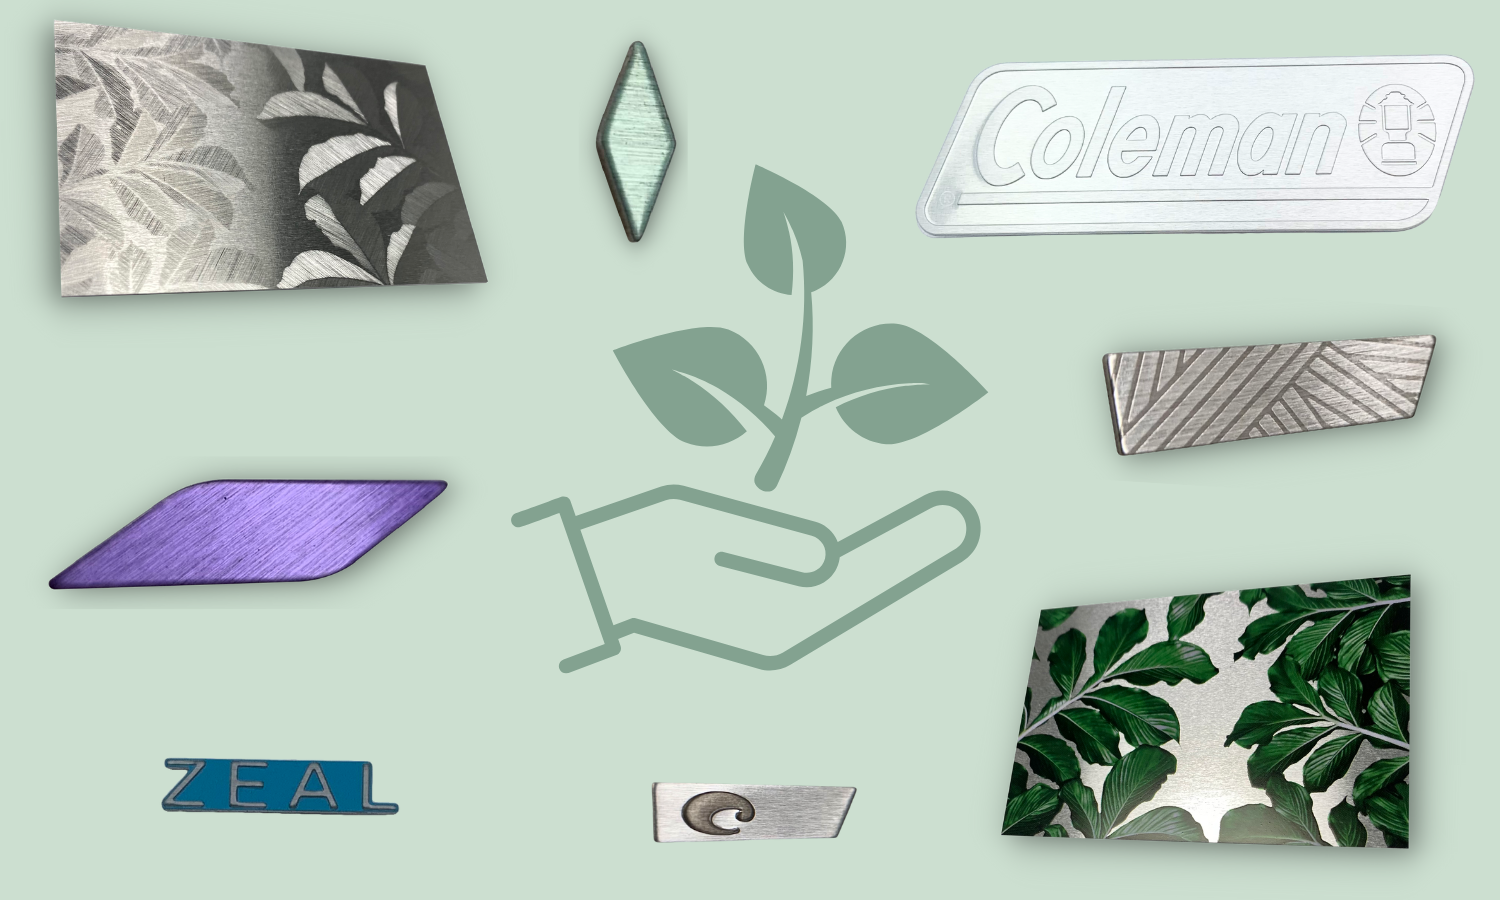 Collage of decorative plaques that were made using recycled aluminum as the base material. Brushed aesthetics with artwork showing leaves and other recycled imagery.